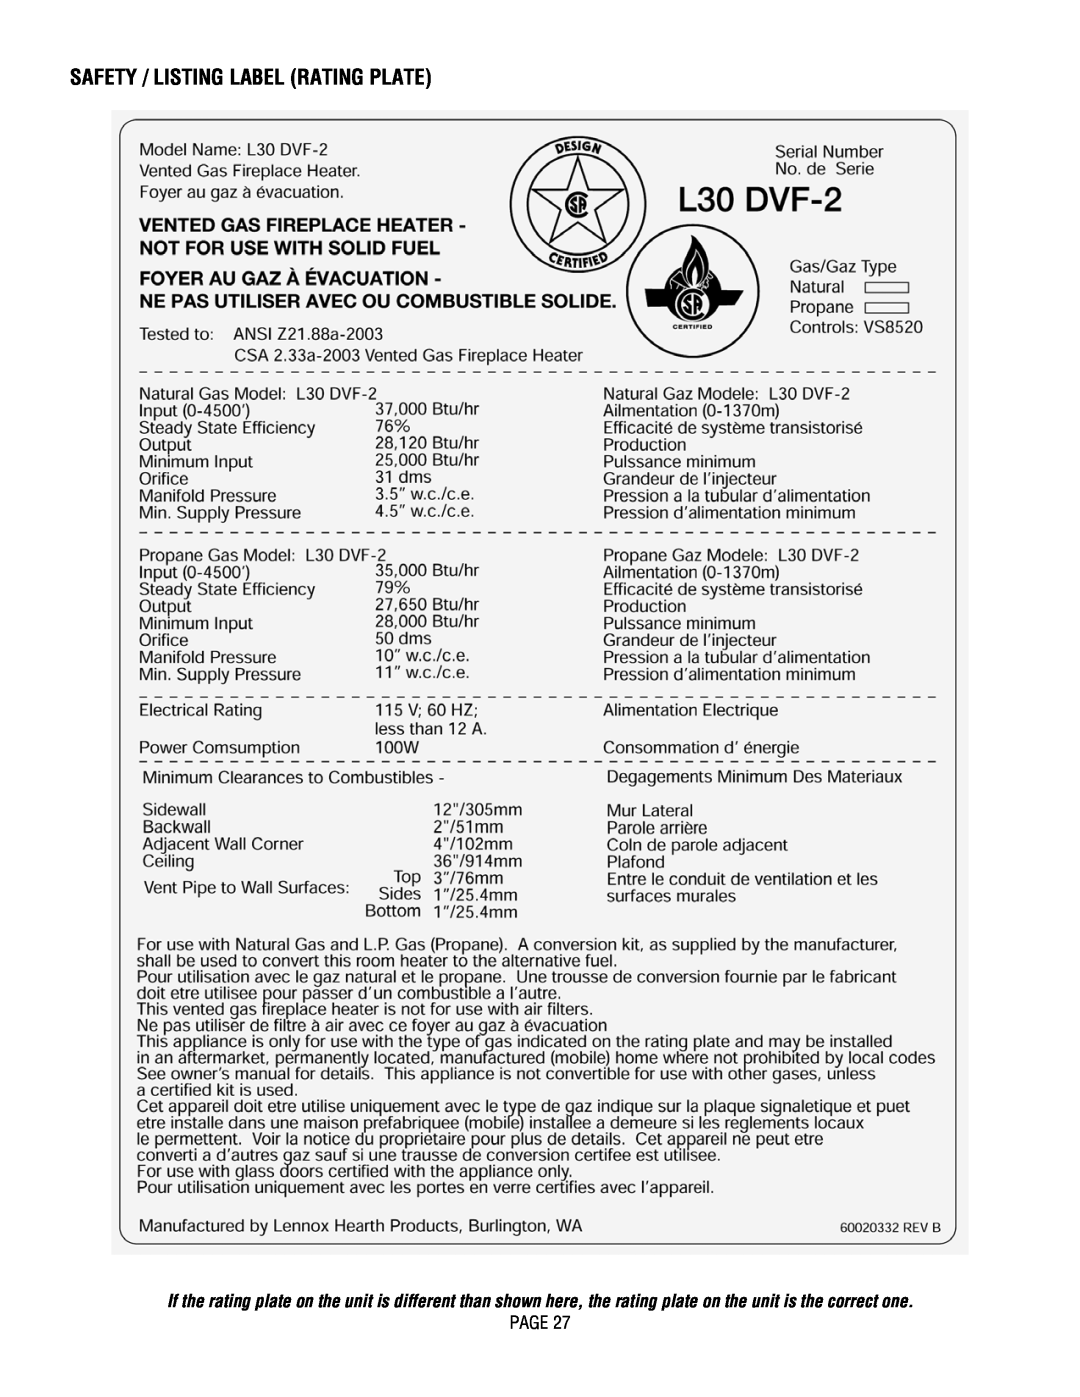 Lennox Hearth L30 DVF-2 operation manual Safety / Listing Label Rating Plate 